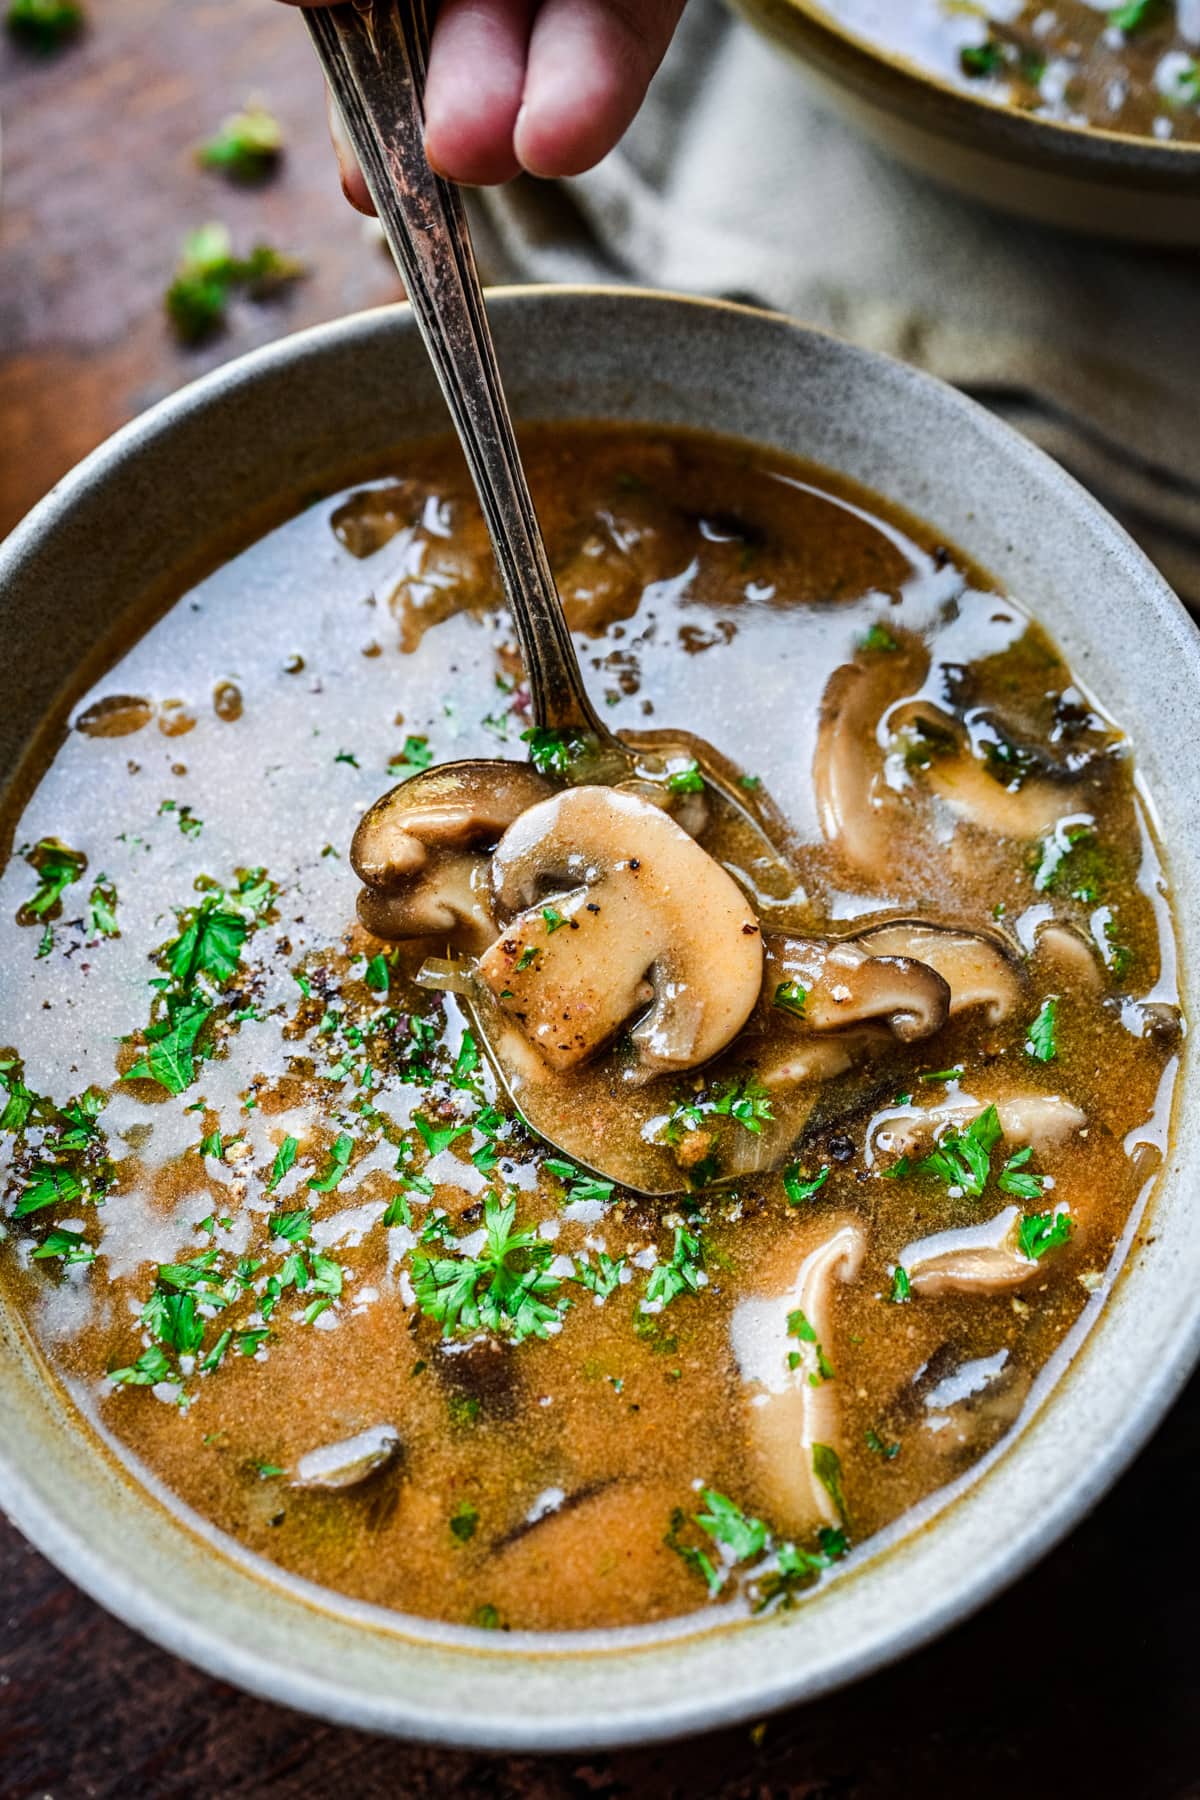 Close up of spoon with mushroom in it in the soup.